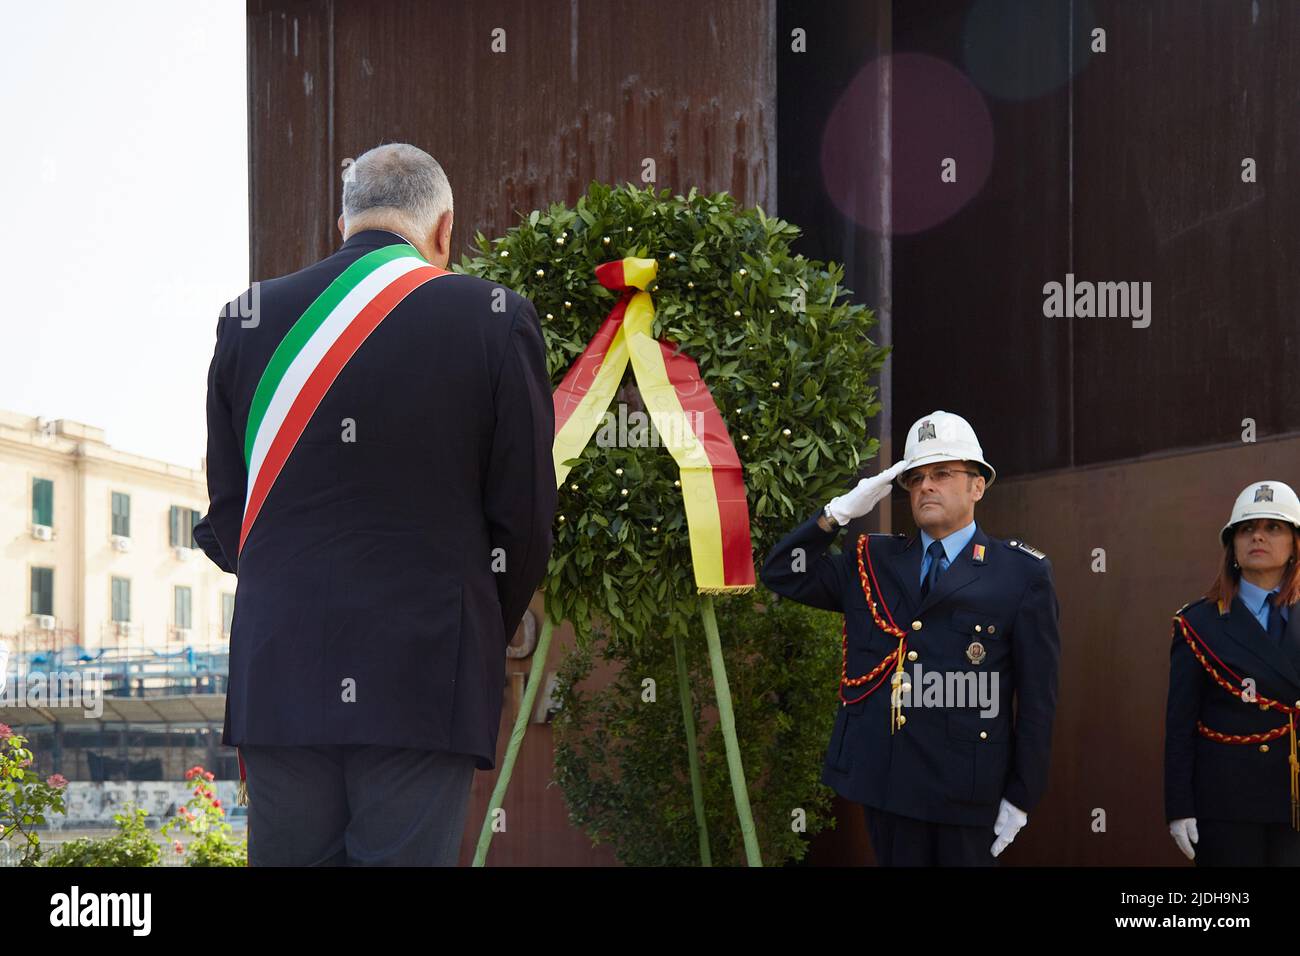 Palermo, Sicily, Italy. 21st June, 2022. First official act of ROBERTO LAGALLA as new mayor of Palermo.Lagalla placed a wreath of flowers in the monument dedicated to the victims of the Mafia in Piazza XIII Victime. At the same time, a group of demonstrators from the artistic and cultural movement Our Voice has gathered in front of the monument in dispute over the controversy for the support, during the election campaign, of Marcello Dell'Utri and TotÃ² Cuffaro, convicted of mafia.The demonstrators carried a banner reads ''Mayor Lagalla, before commemorating the victims of the Mafia, break Stock Photo